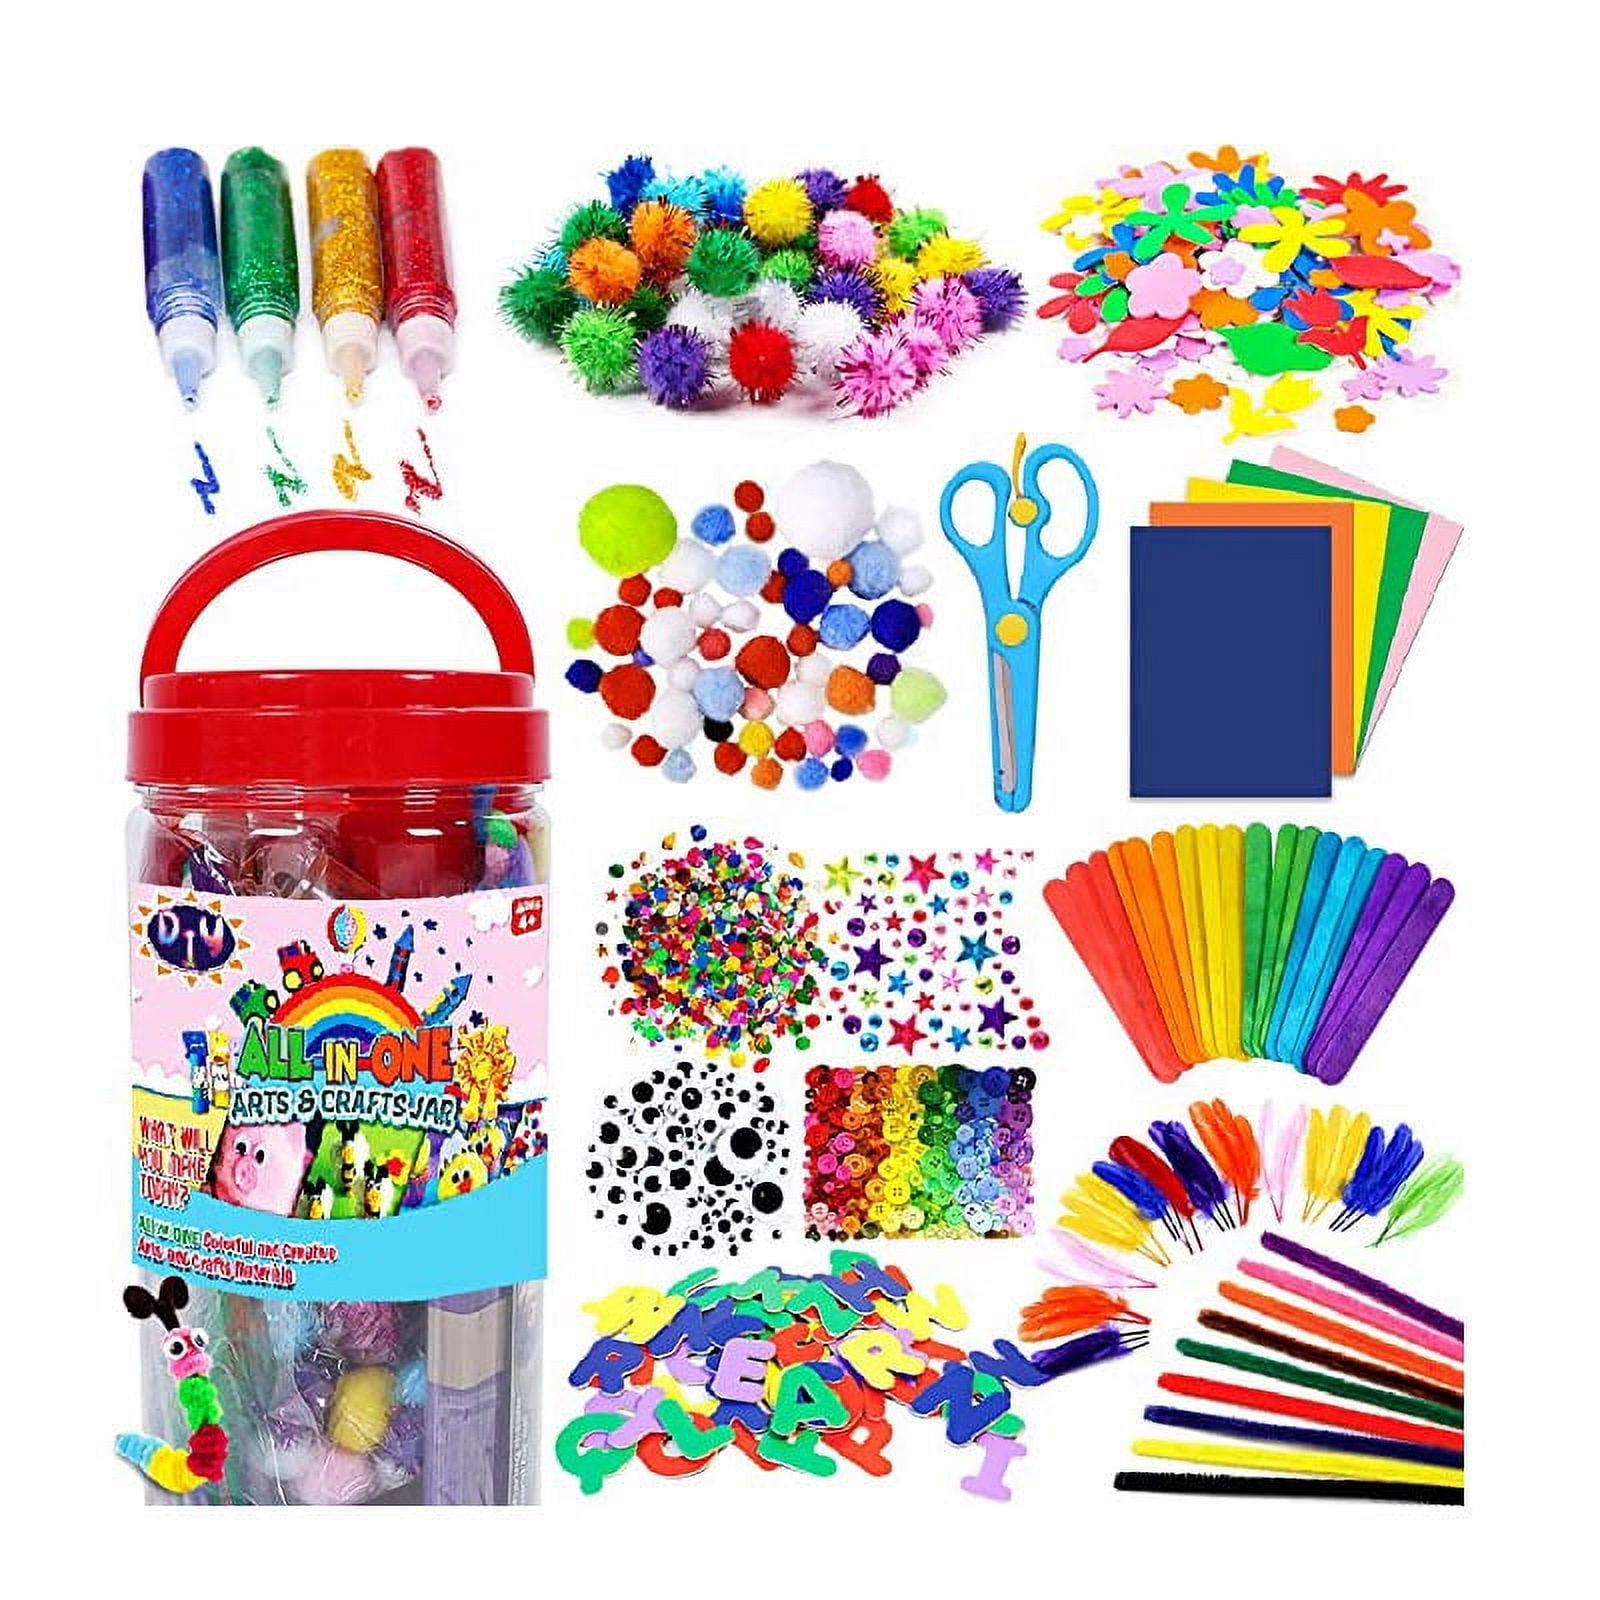 The Best Art Supplies for Kids To Encourage Creativity and Build Skills